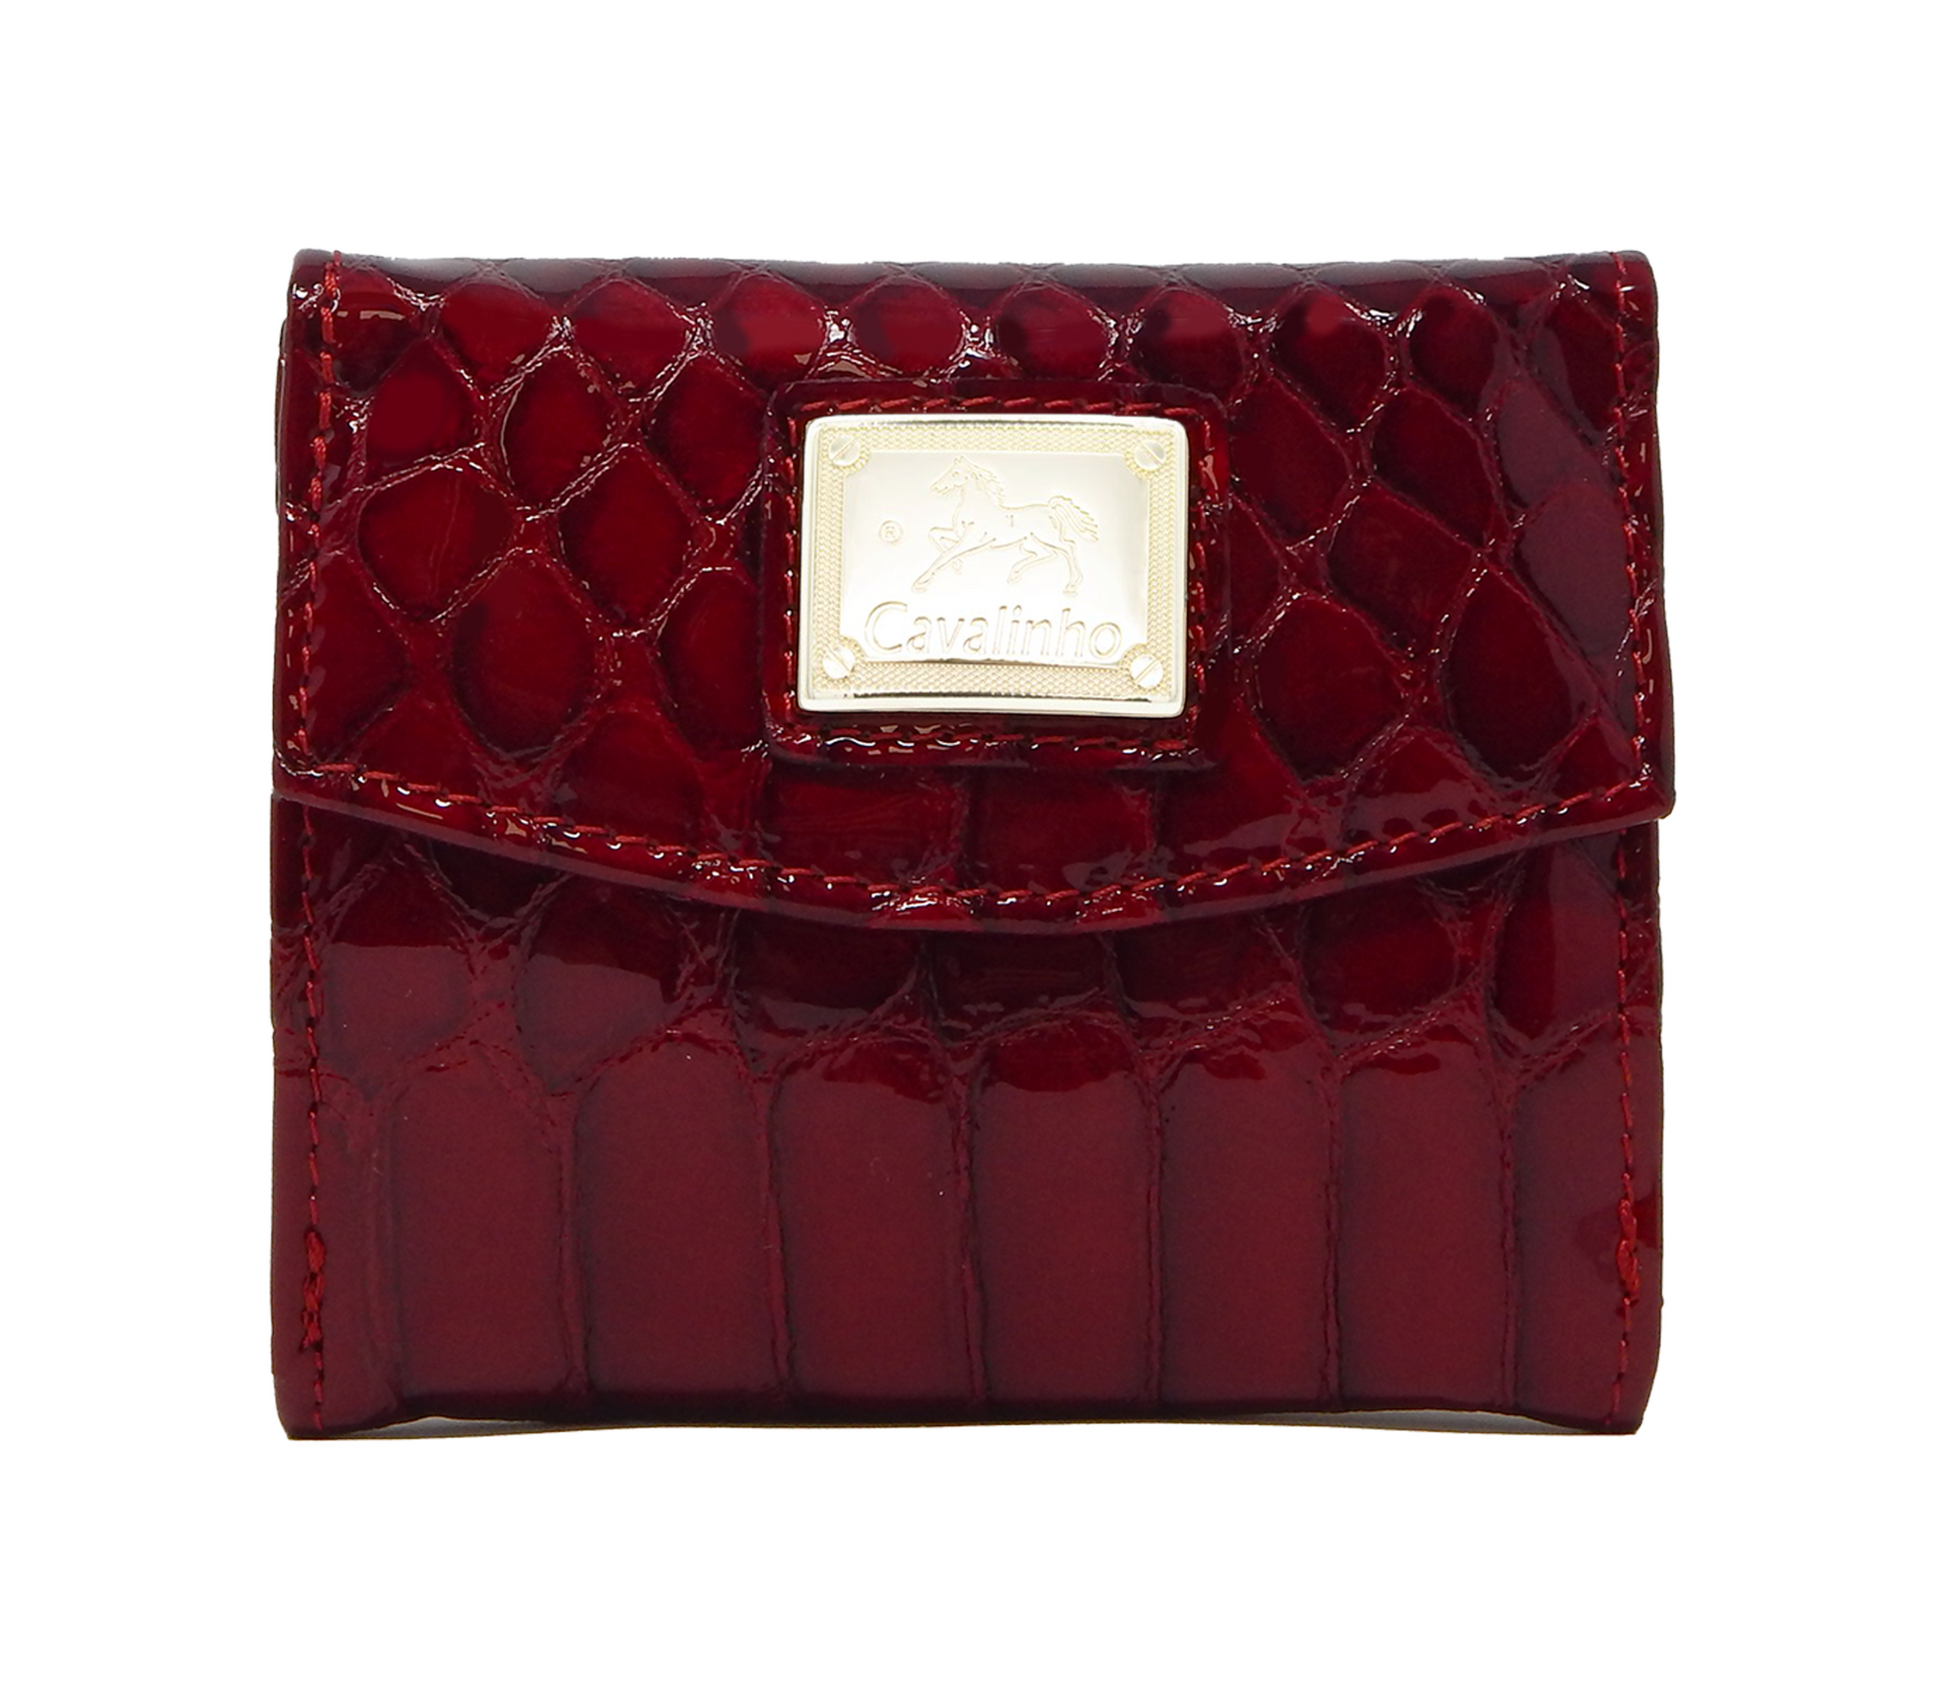 Cavalinho Galope Mini Patent Leather Wallet - Red - 28170530.04_1